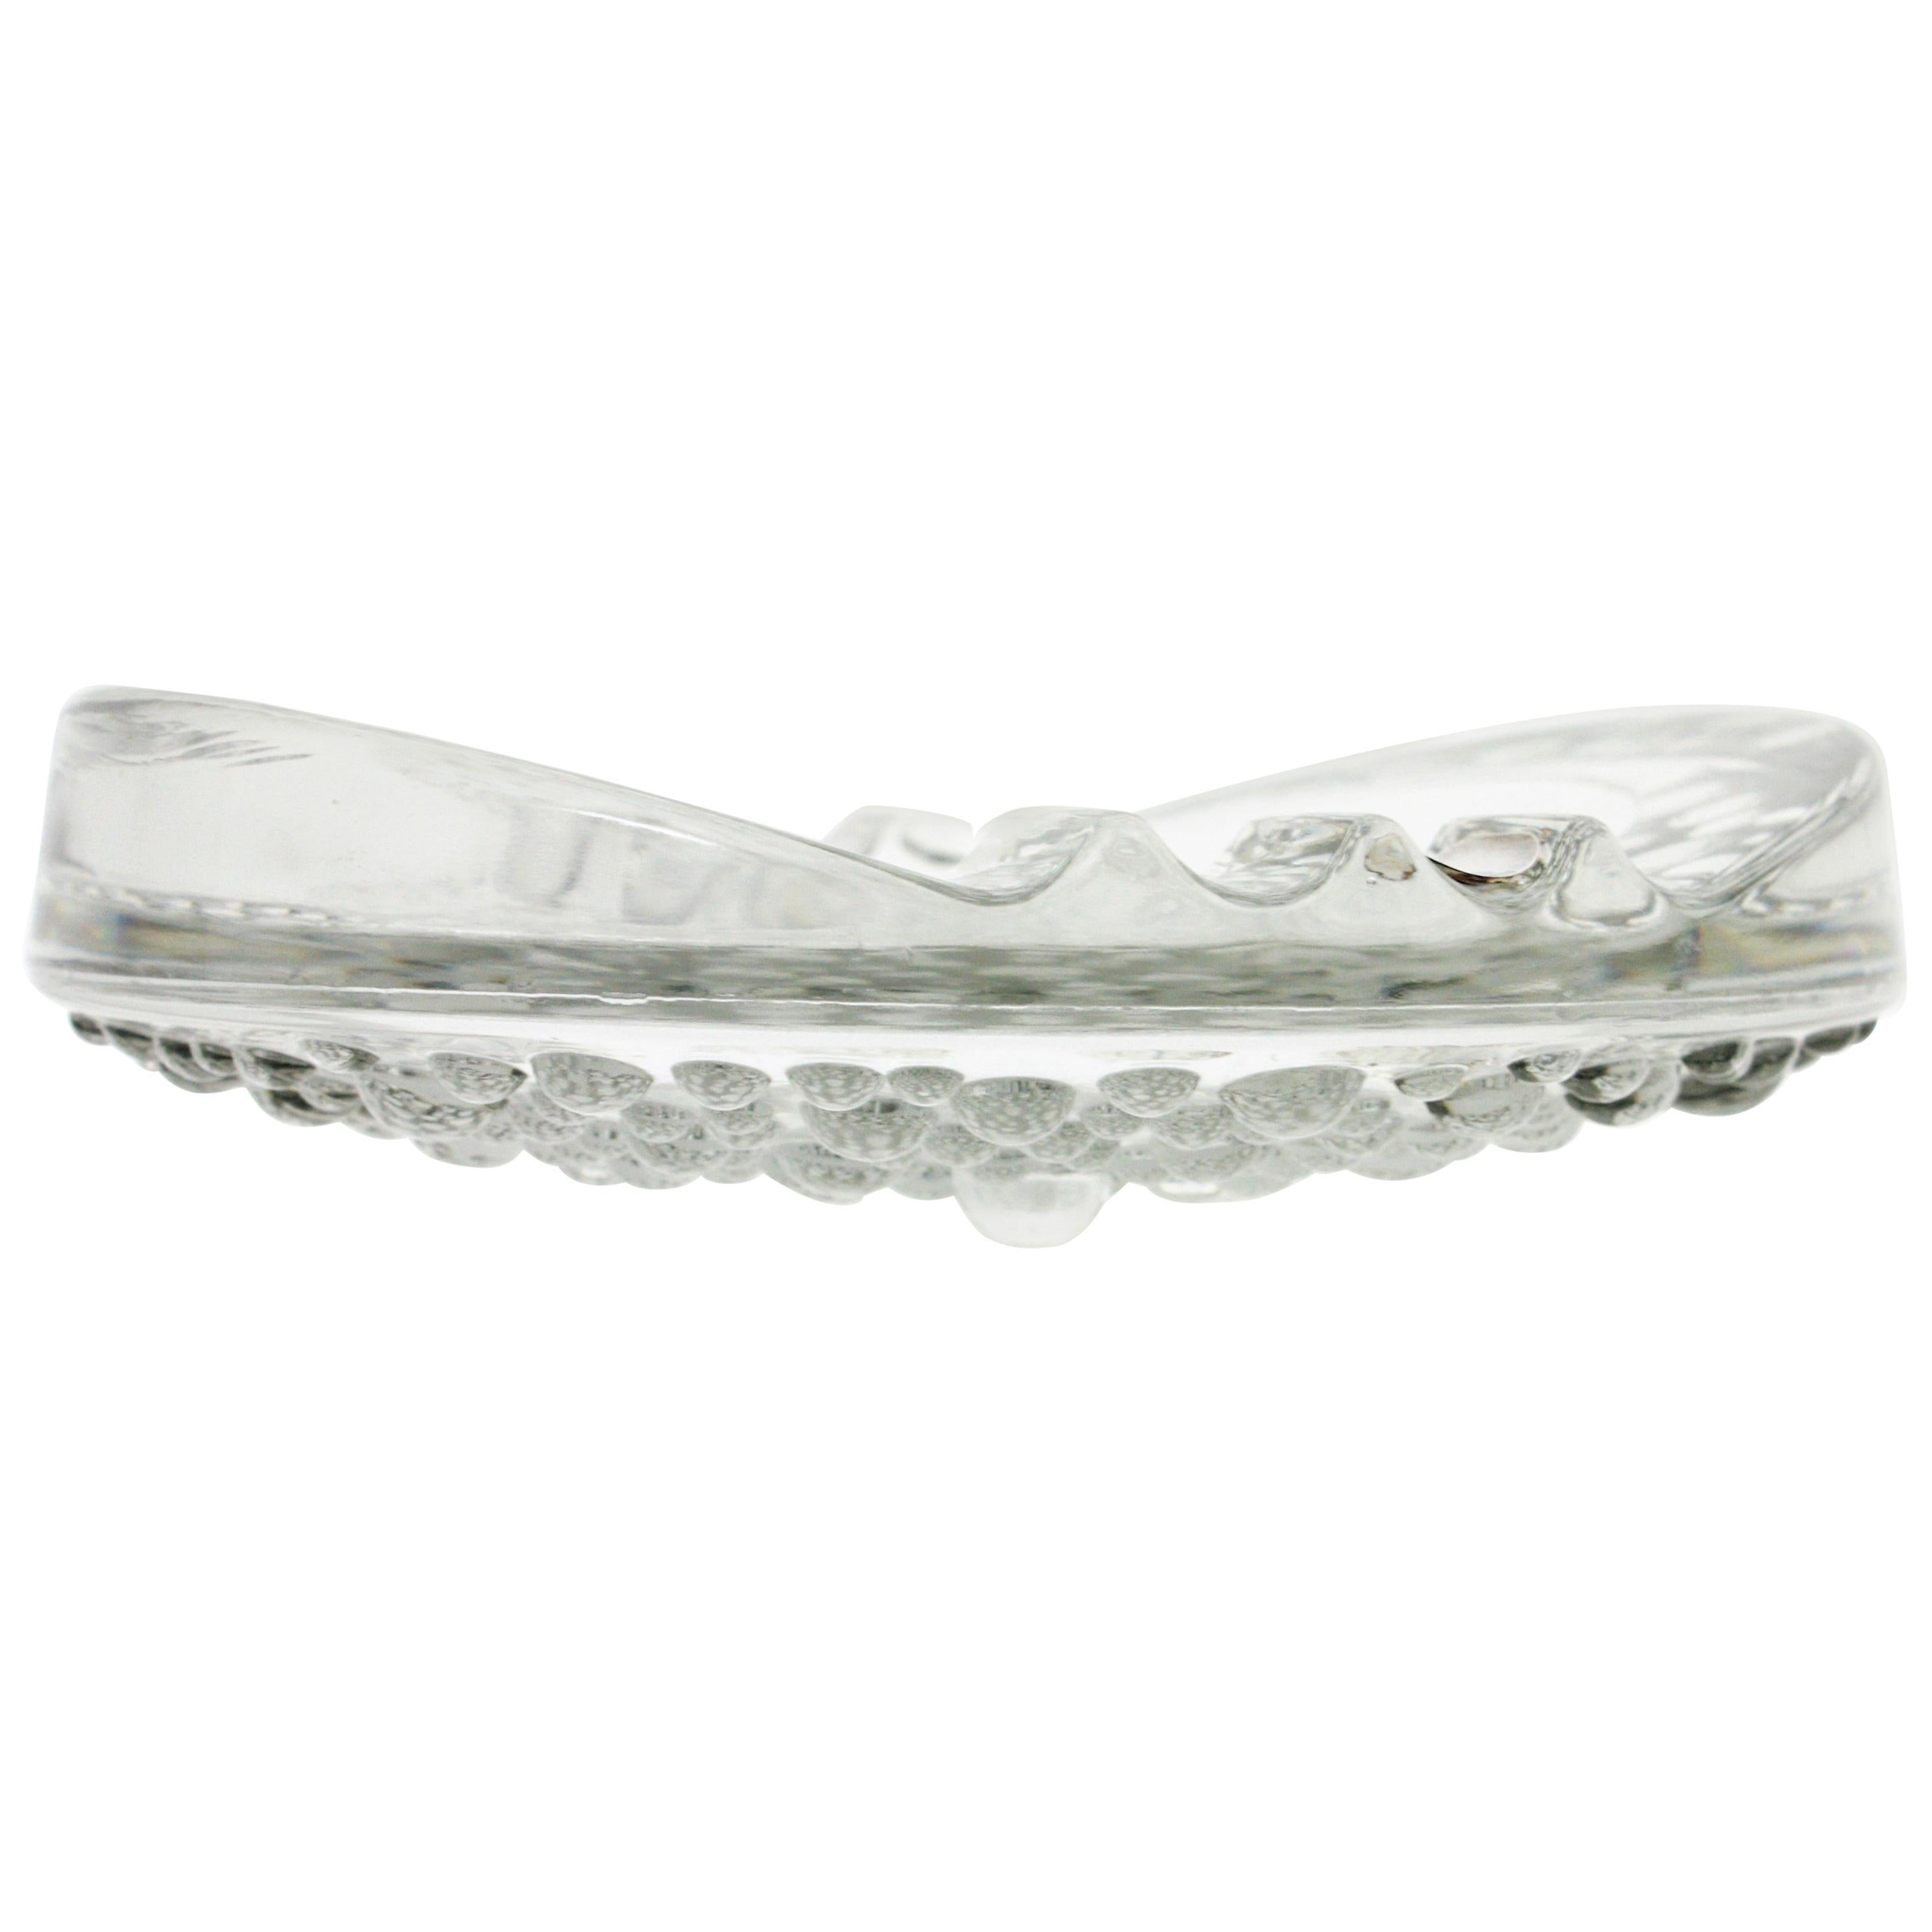 Murano Italian Art Glass Ashtray, Bubbles Design and Sterling Silver Details In Excellent Condition For Sale In Barcelona, ES